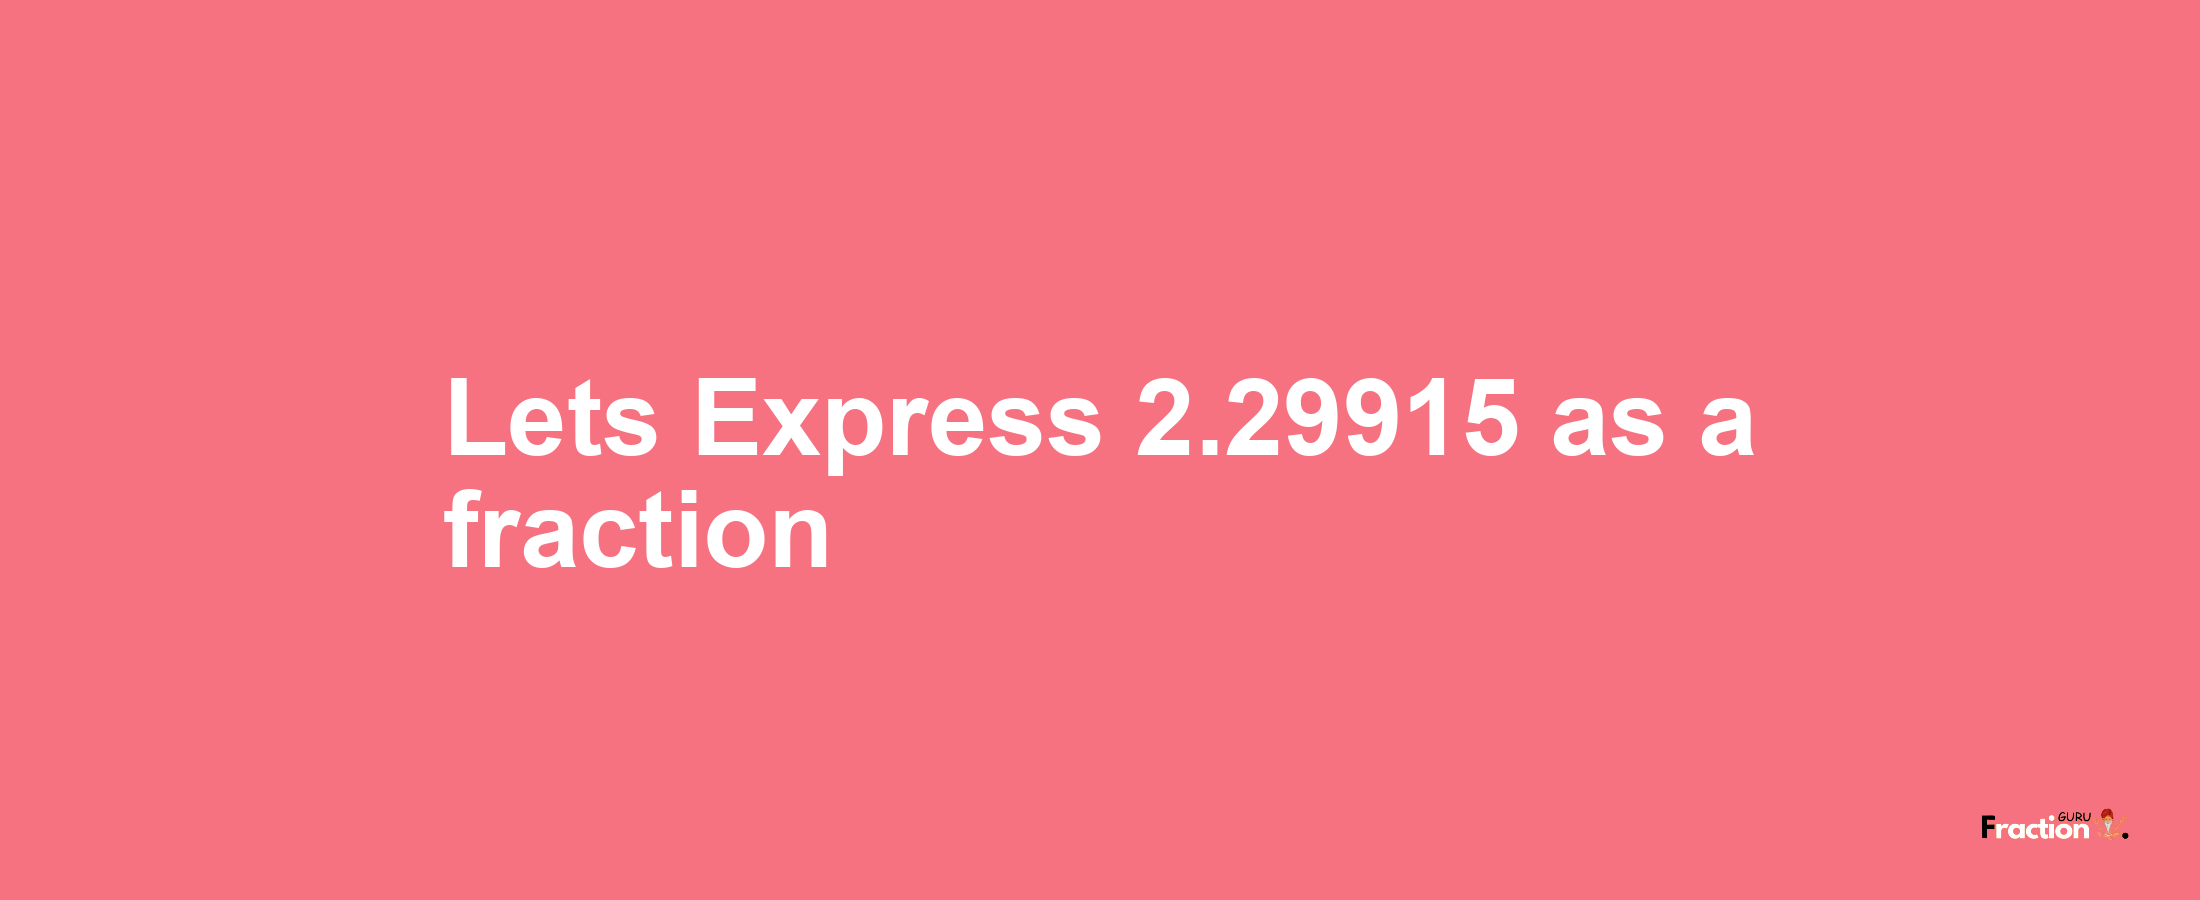 Lets Express 2.29915 as afraction